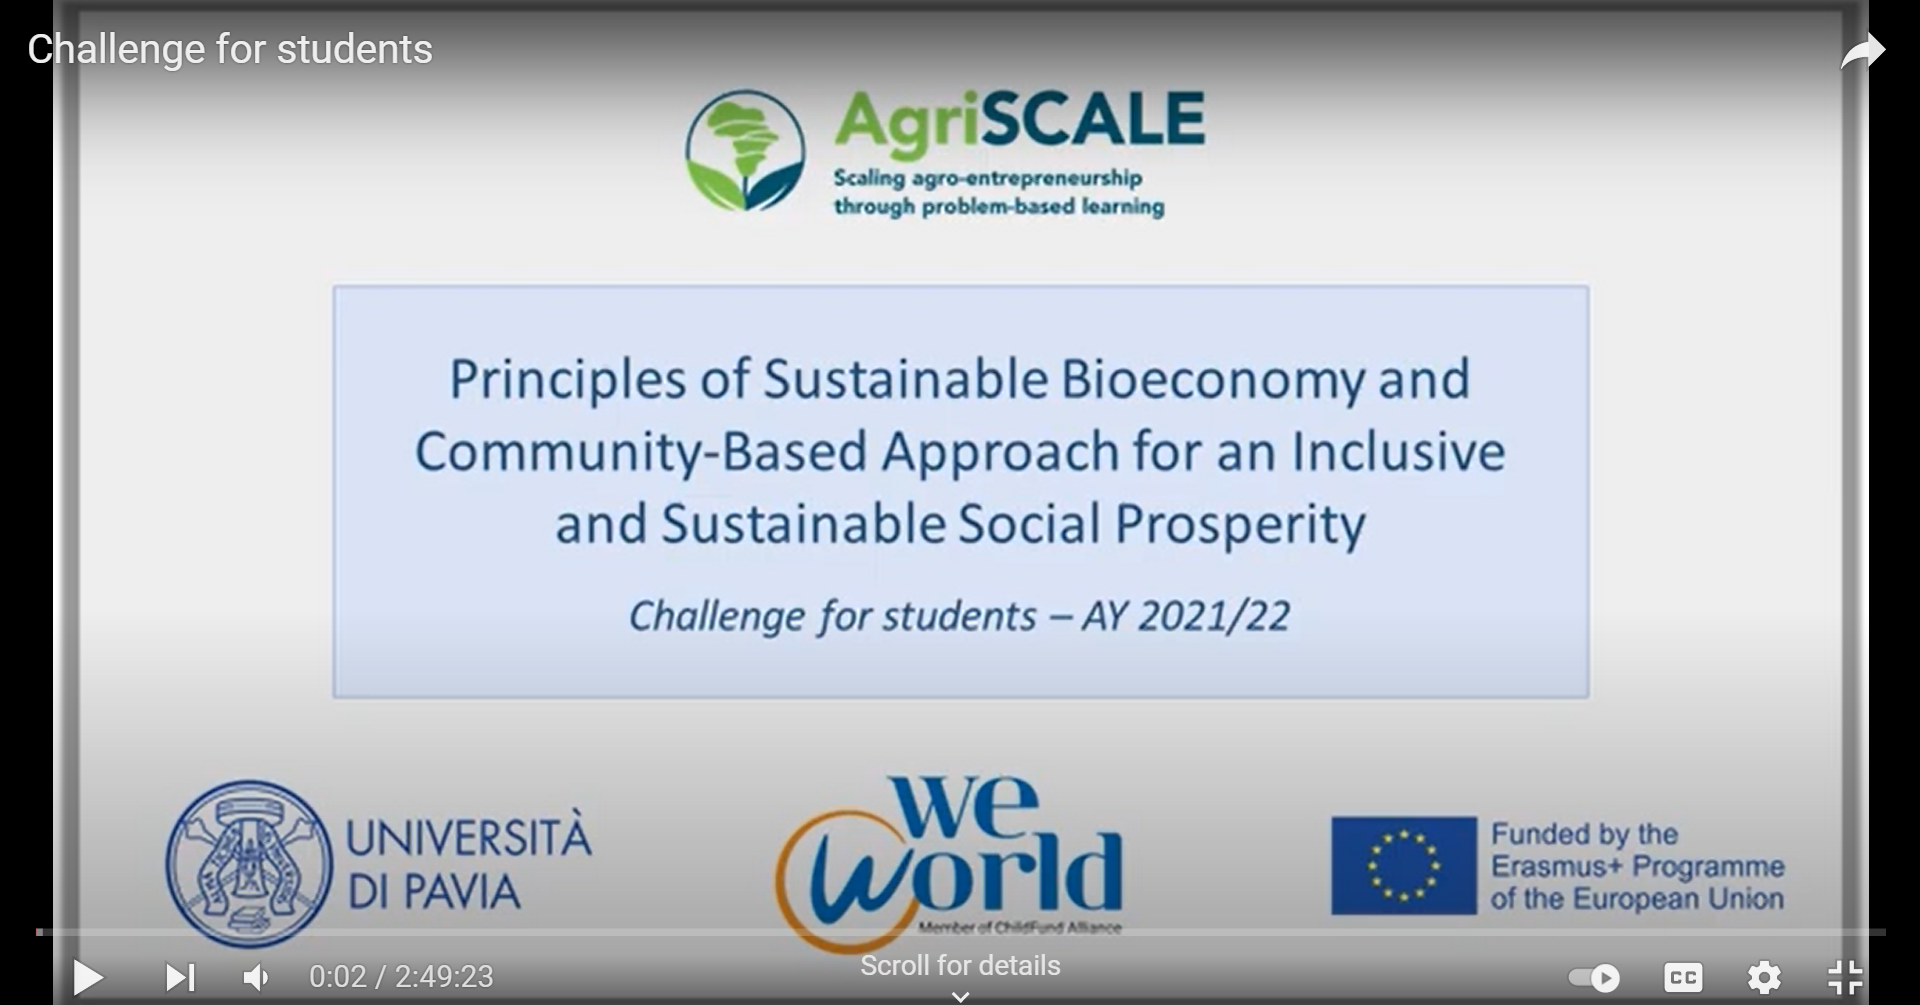 WeWorld and University of Pavia Challenge for Students. Part 1